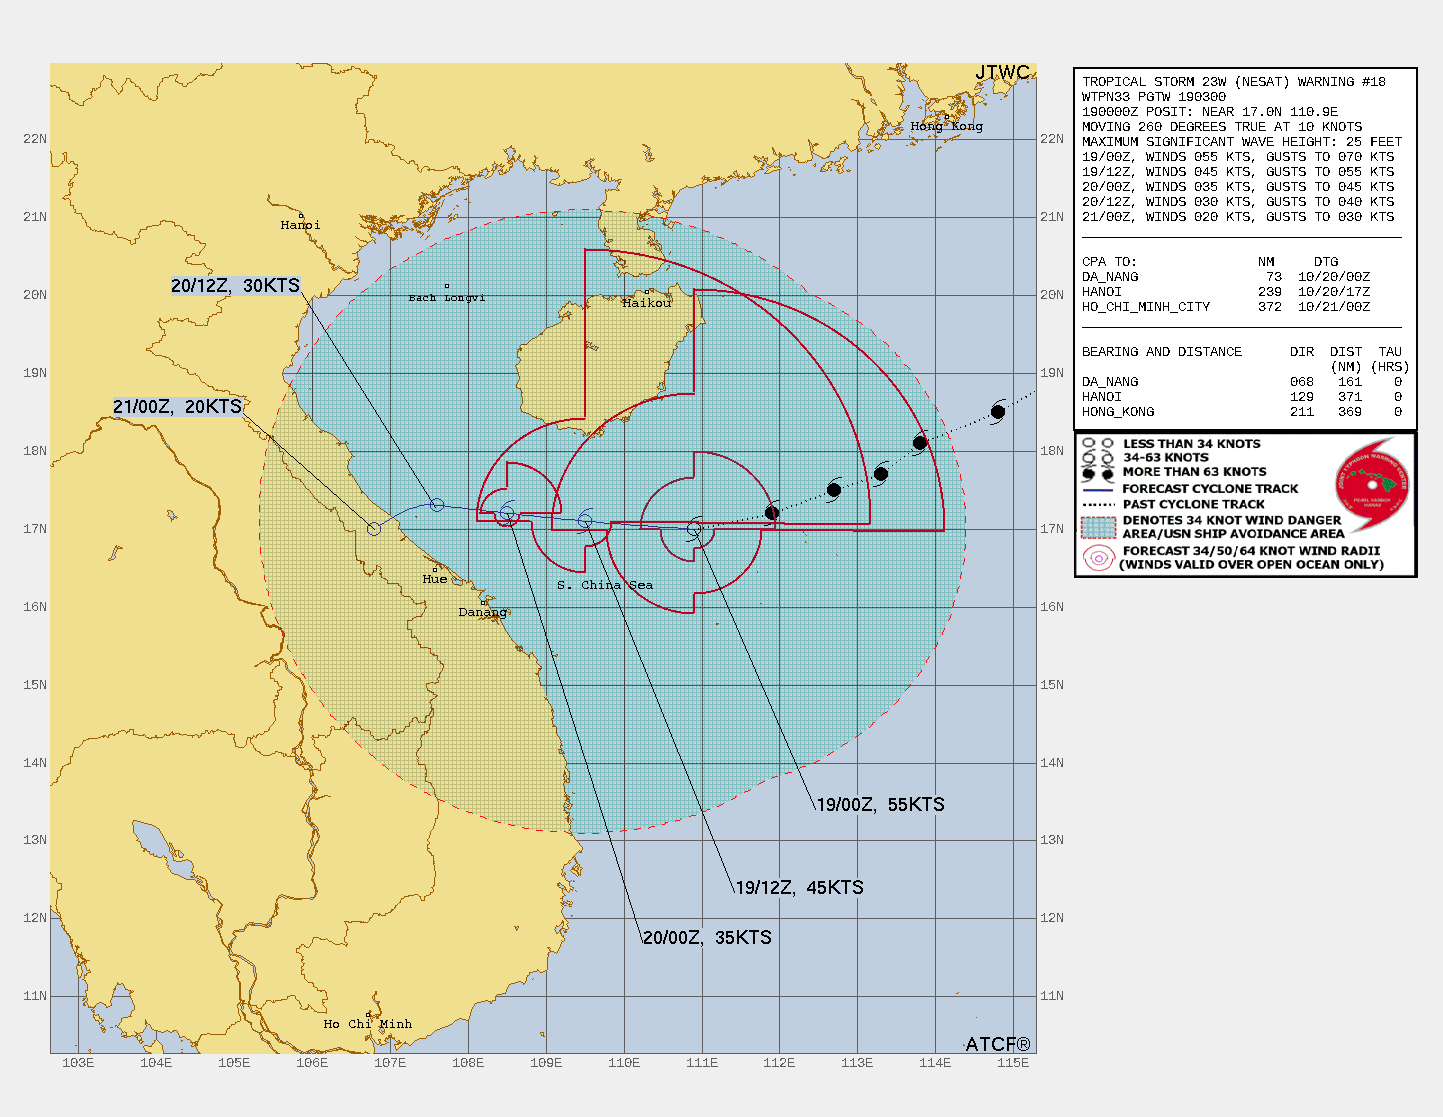 FORECAST REASONING.  SIGNIFICANT FORECAST CHANGES: THERE ARE NO SIGNIFICANT CHANGES TO THE FORECAST FROM THE PREVIOUS WARNING.  FORECAST DISCUSSION: TS NESAT WILL CONTINUE ON ITS WESTWARD TRACK UNDER THE STEERING INFLUENCE OF THE STR, MAKING A FINAL LANDFALL JUST NORTHWEST OF HUE, VIETNAM, JUST BEFORE TAU 48. THE HARSH ENVIRONMENT, CAUSED MOSTLY BY STRONG VERTICAL WIND SHEAR, COLD DRY AIR INTRUSION NEAR THE SURFACE, AND LAND INTERACTION WITH THE ISLAND OF HAINAN AND EVENTUALLY WITH VIETNAM, WILL CONTINUE TO RAPIDLY ERODE THE SYSTEM, LEADING TO DISSIPATION BY TAU 48, POSSIBLY SOONER.